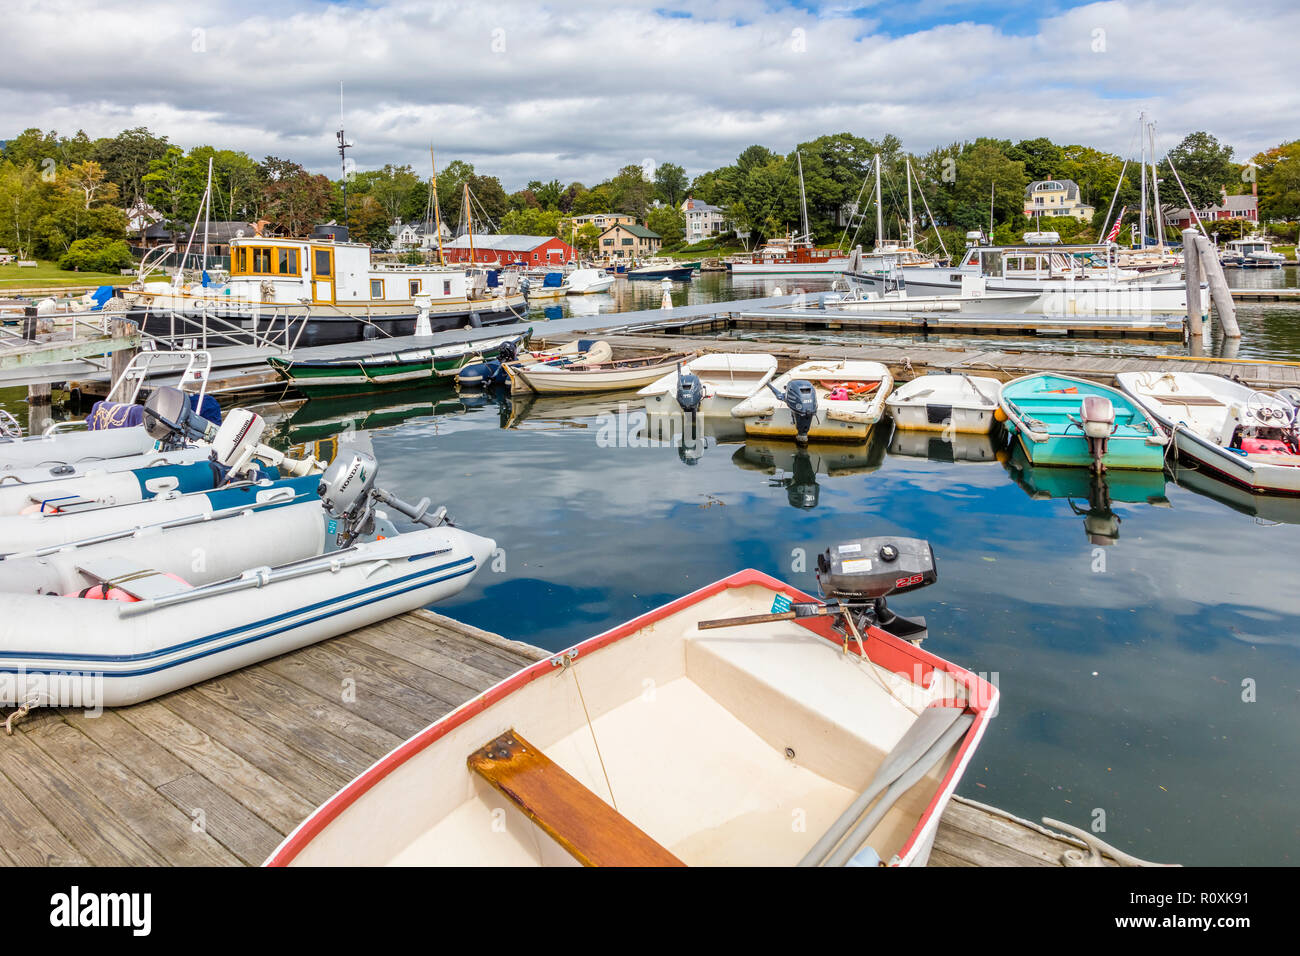 Harbor in tourist town of Camden on the Atlantic Ocean coast of Maine, United States Stock Photo